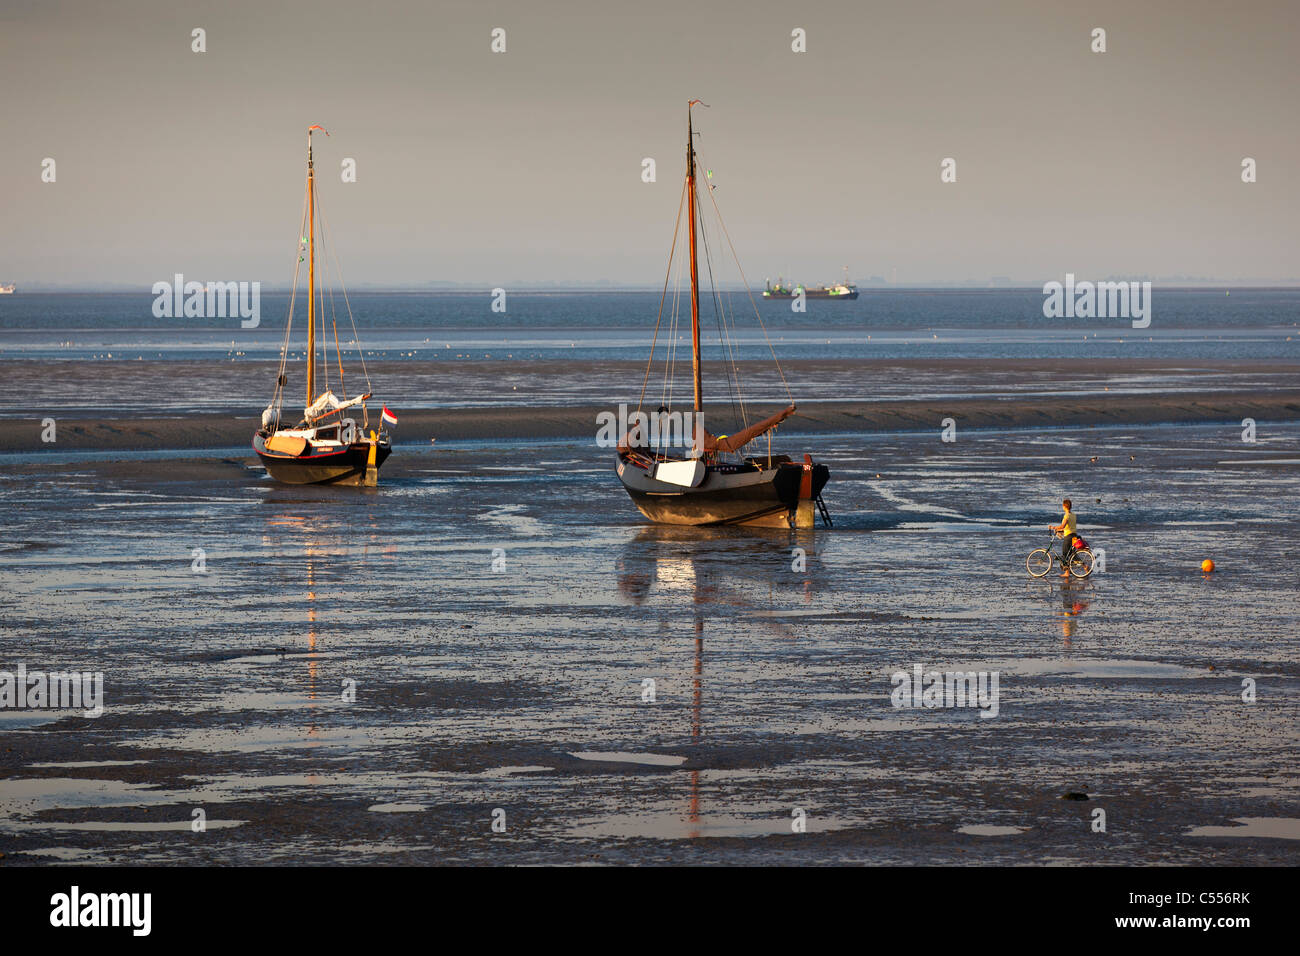 The Netherlands, Nes on Ameland, Island belonging to Wadden Sea Islands. Woman with bicycle walking on mud flat. Sailing boats. Stock Photo